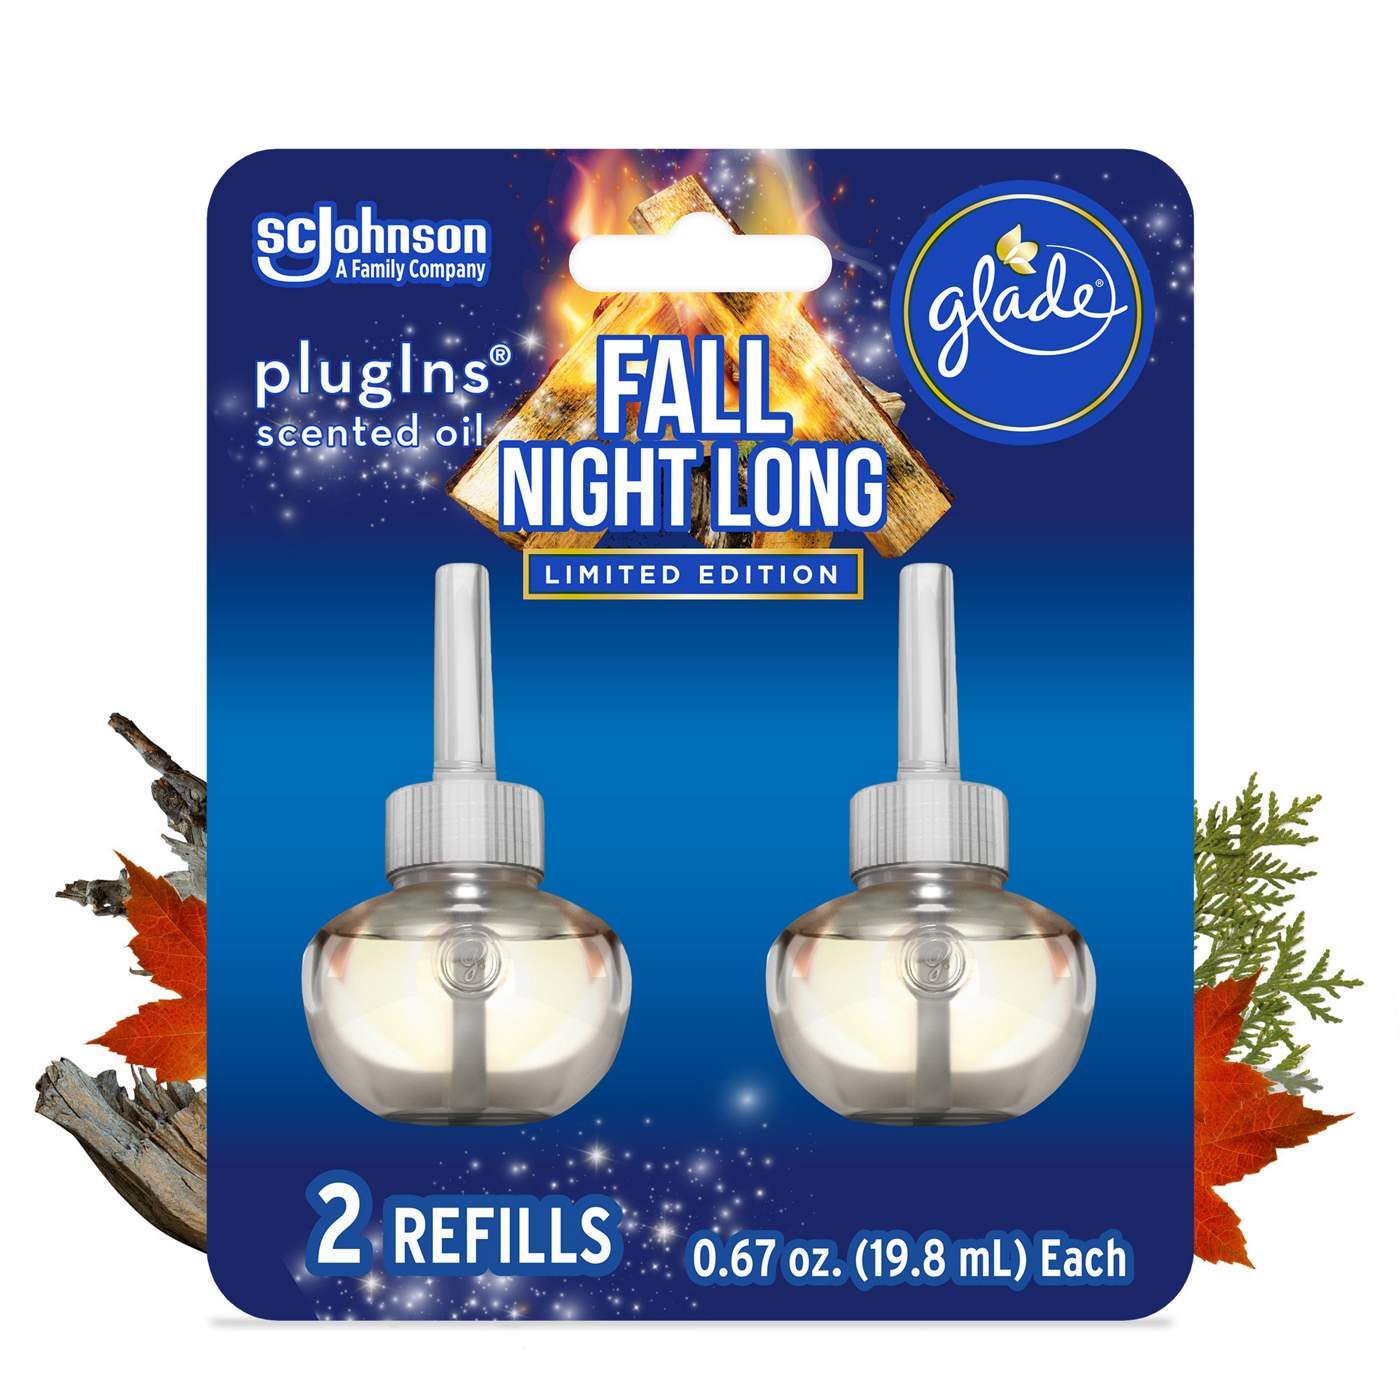 Glade PlugIns Scented Oil Air Freshener Refills - Fall Night Long; image 2 of 3